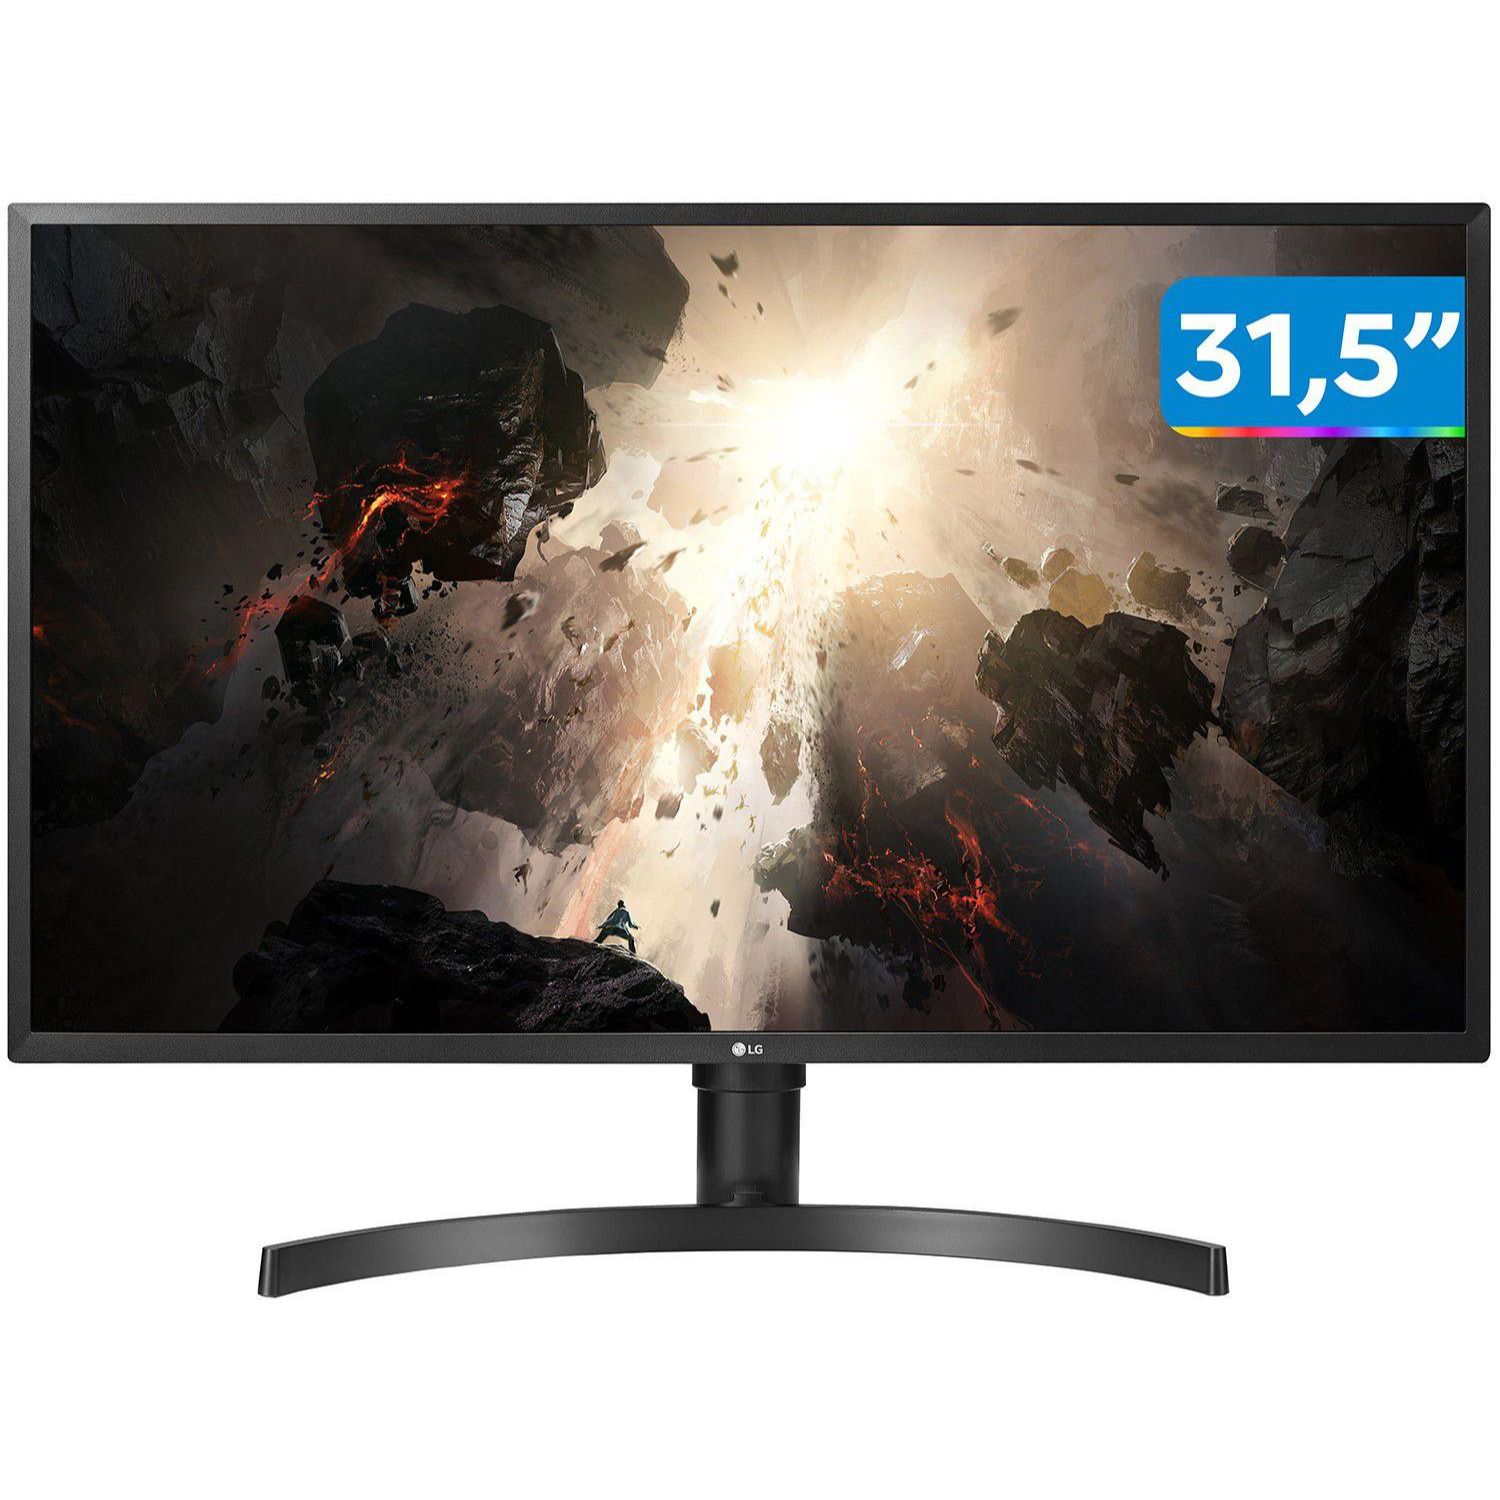 [APP + CLIENTE OURO + CUPOM] Monitor para PC LG 32UK550 31,5” UHD 4K HDR10 - 2 HDMI 31235